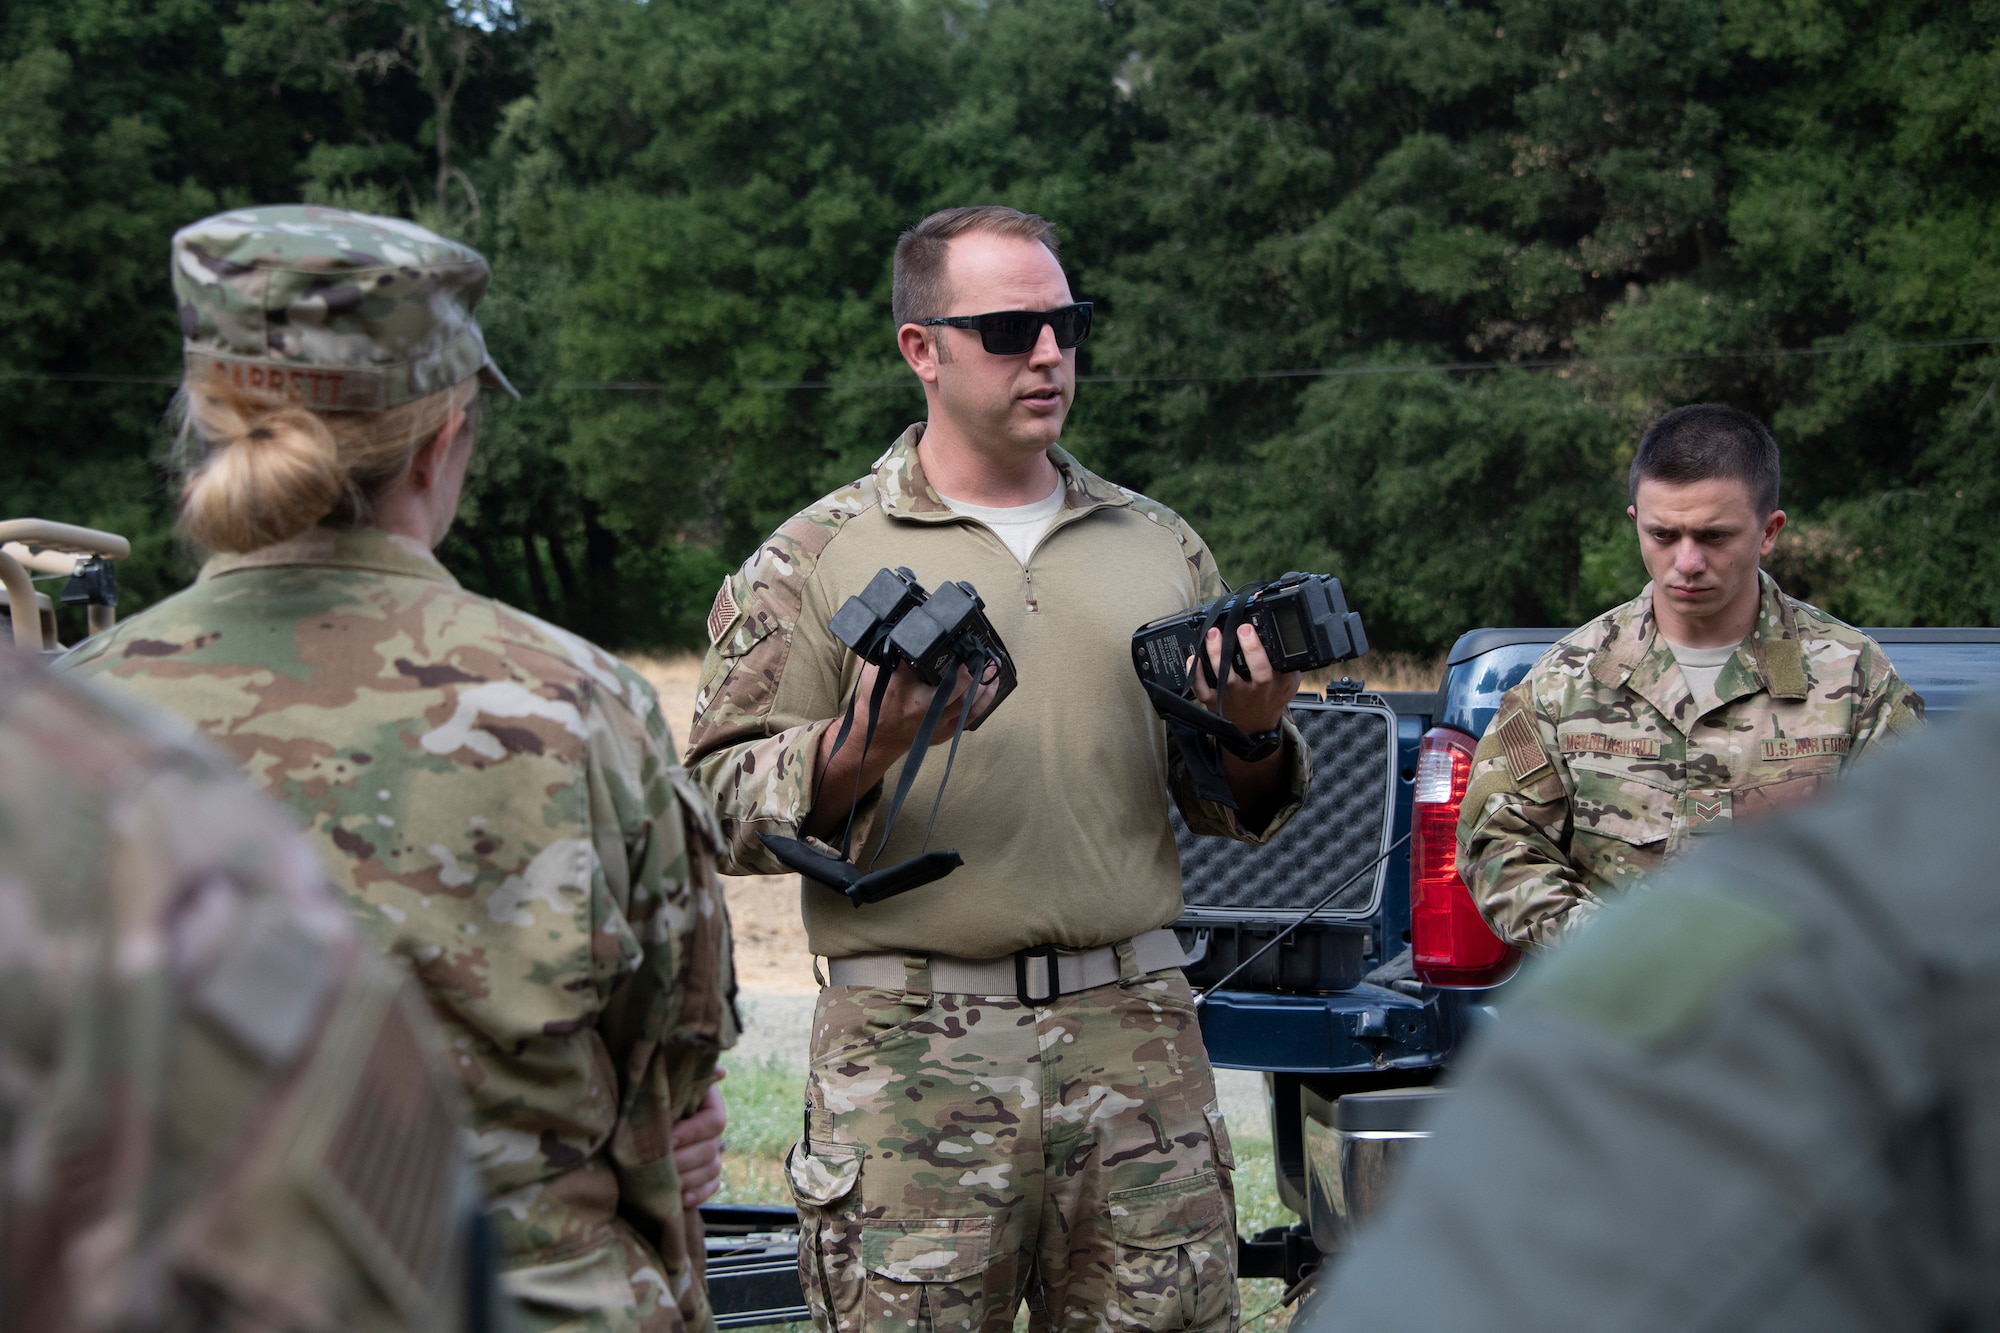 U.S. Air Force Tech. Sgt. Benjamin Heard, 60th Operations Squadron survival, evasion, resistance and escape training NCO officer in charge gives last minute instruction on communication devices before a SERE training exercise for aircrew members that will last well into the evening, Aug. 5, 2019 in a remote area near Travis Air Force Base, California. SERE instructors conduct the training to improve aircrew’s skill sets and update them on new techniques, procedures and technologies. (U.S. Air Force photo by Heide Couch)